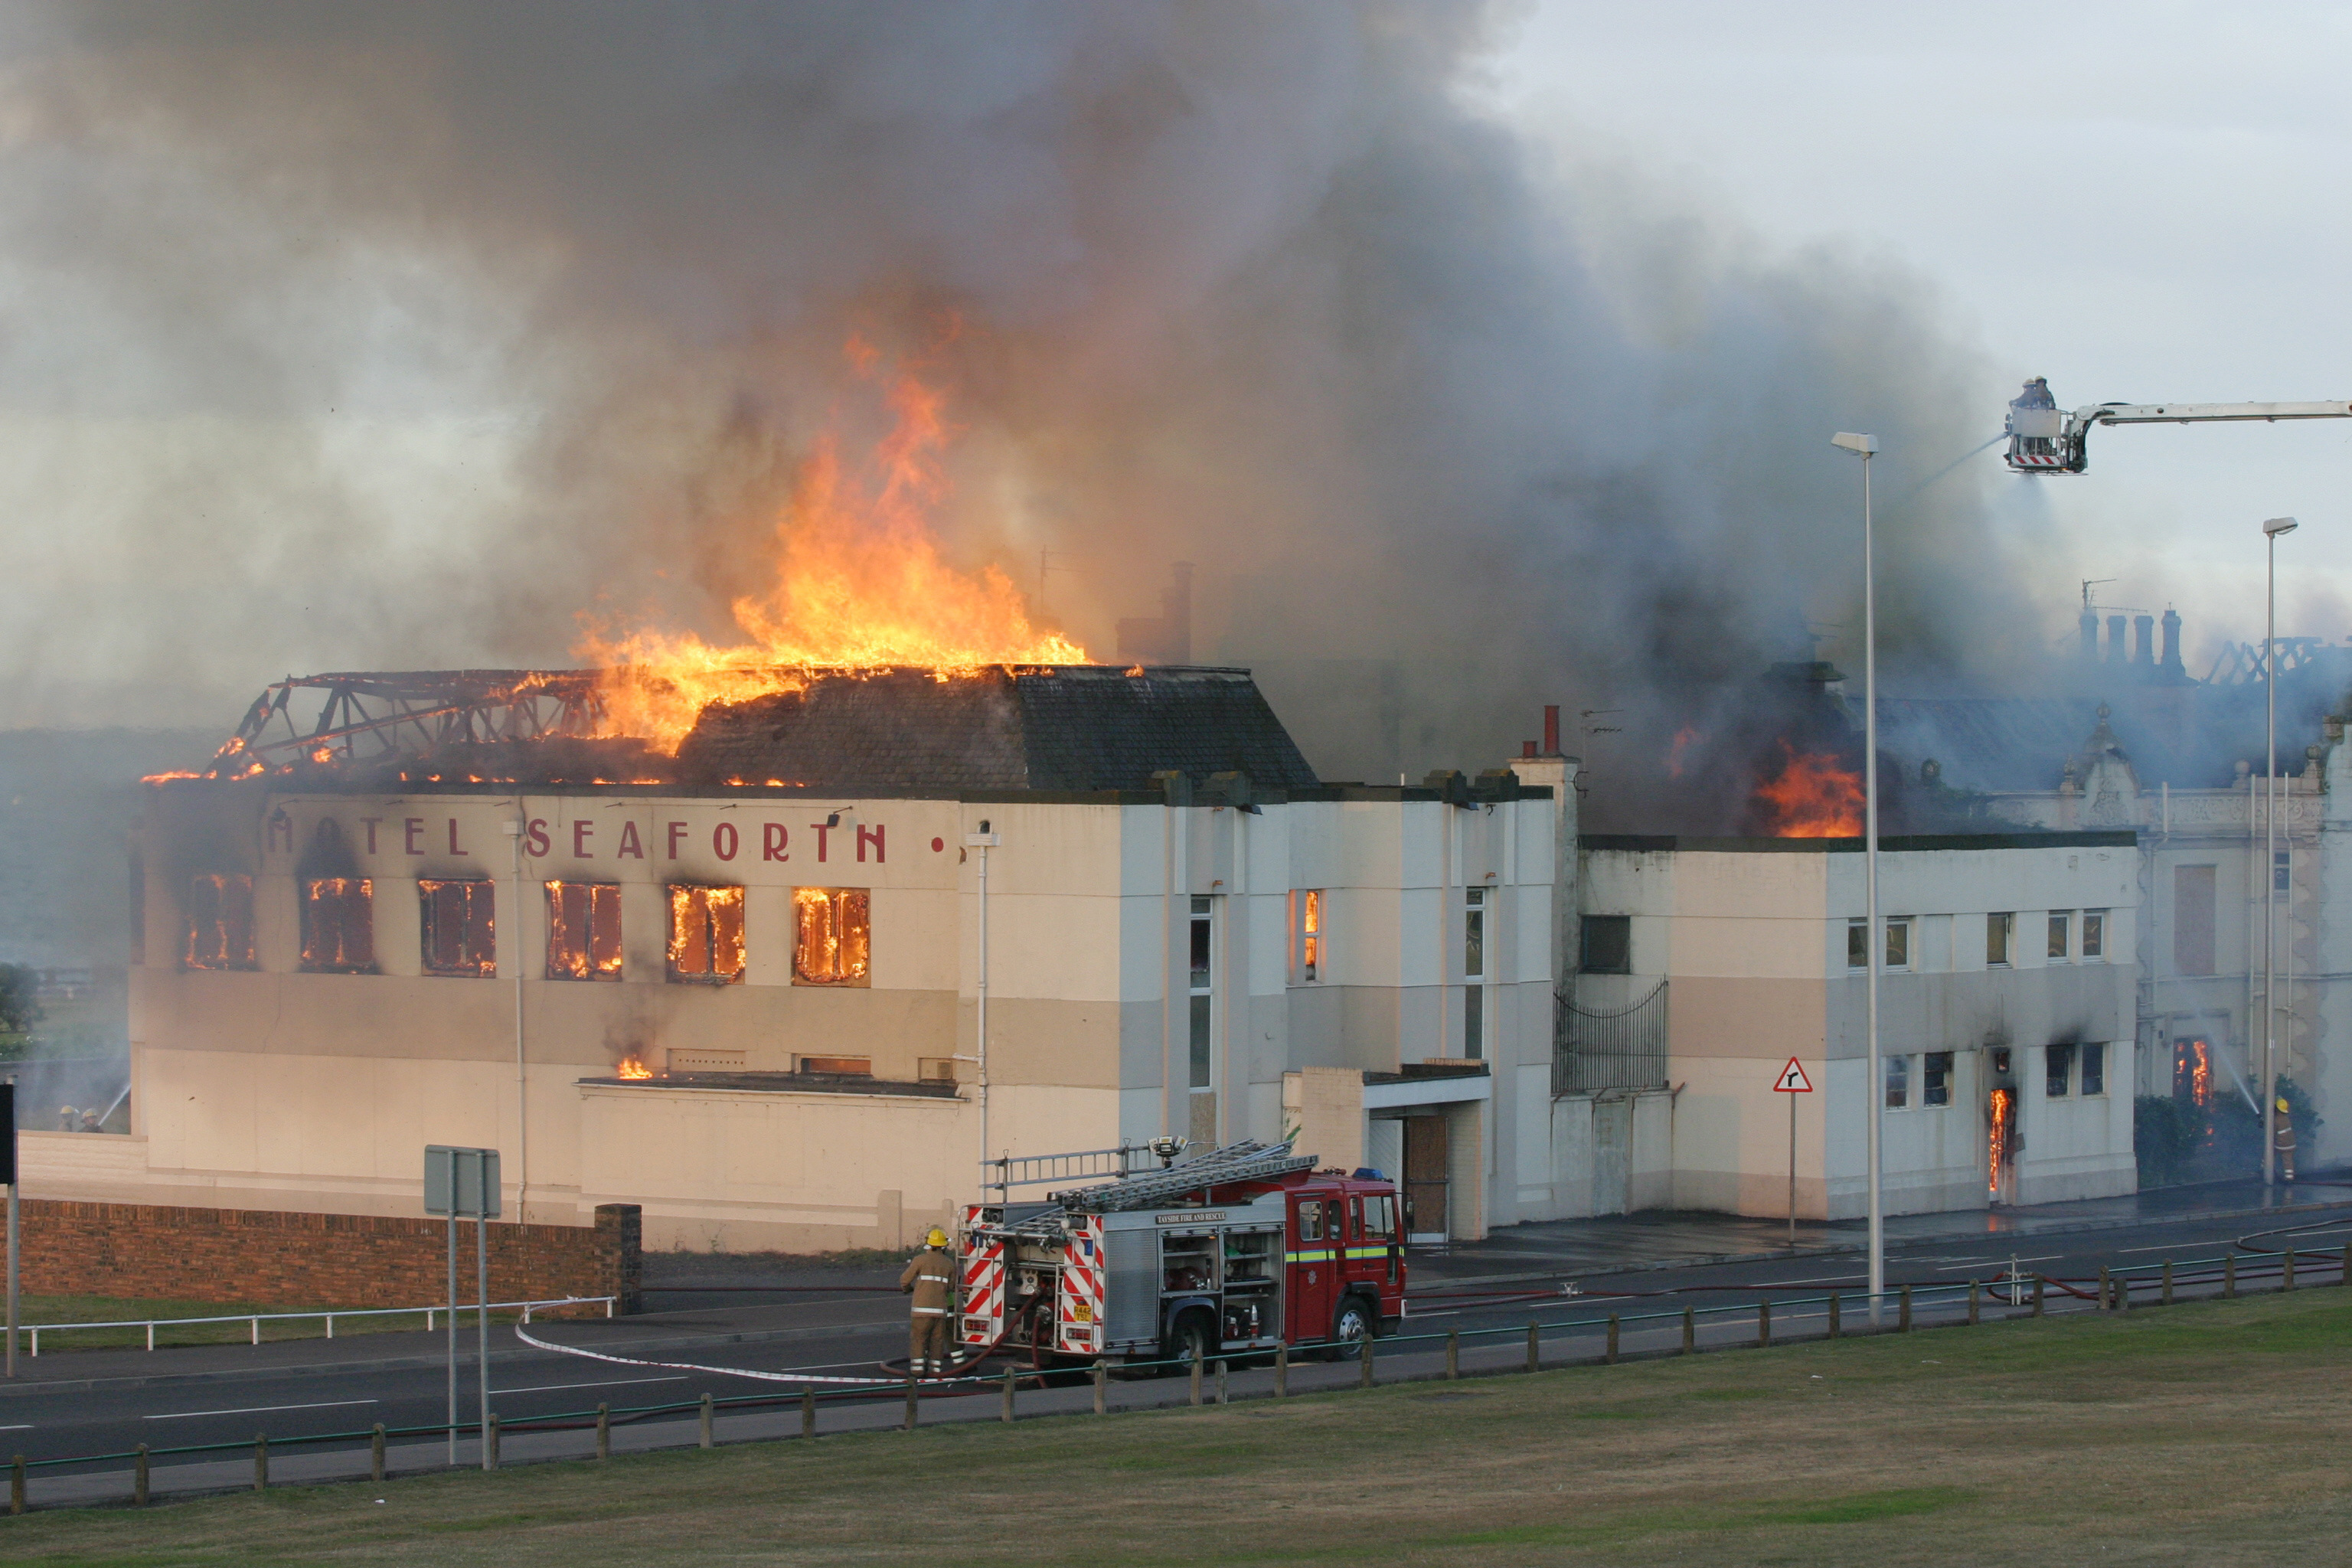 Fire ripped through the Seaforth Hotel in 2006.